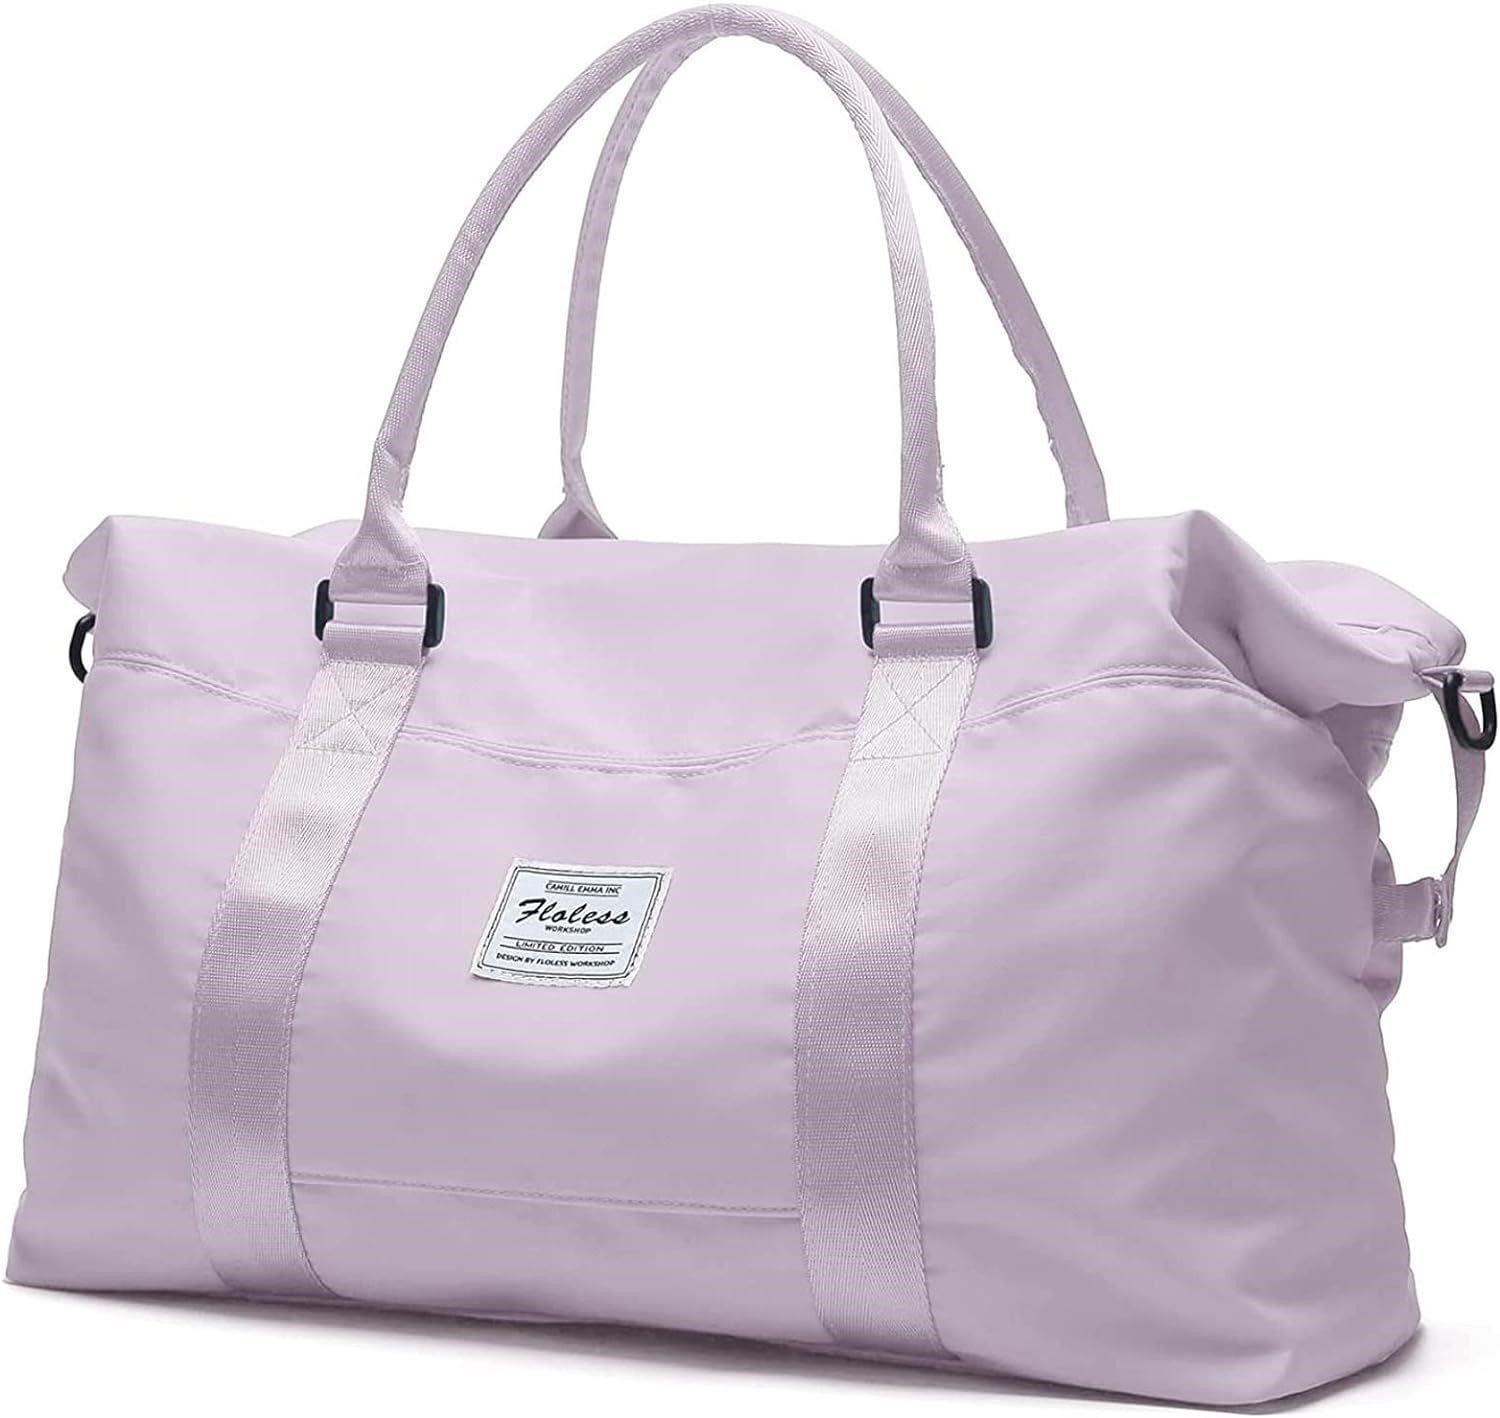 $40 Carry On Bag for Women